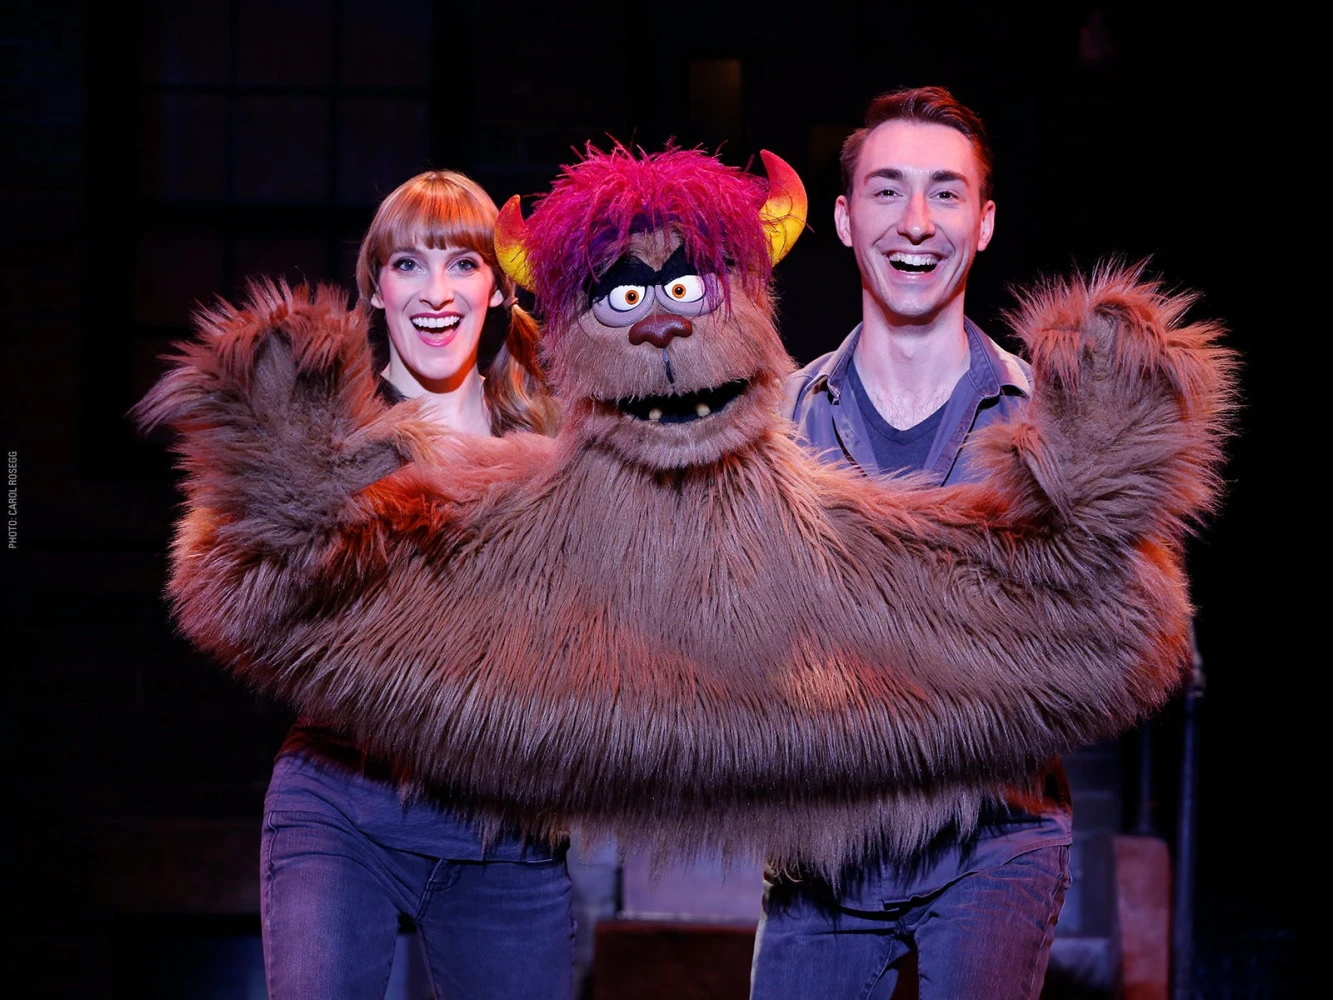 Avenue Q: What to expect - 1